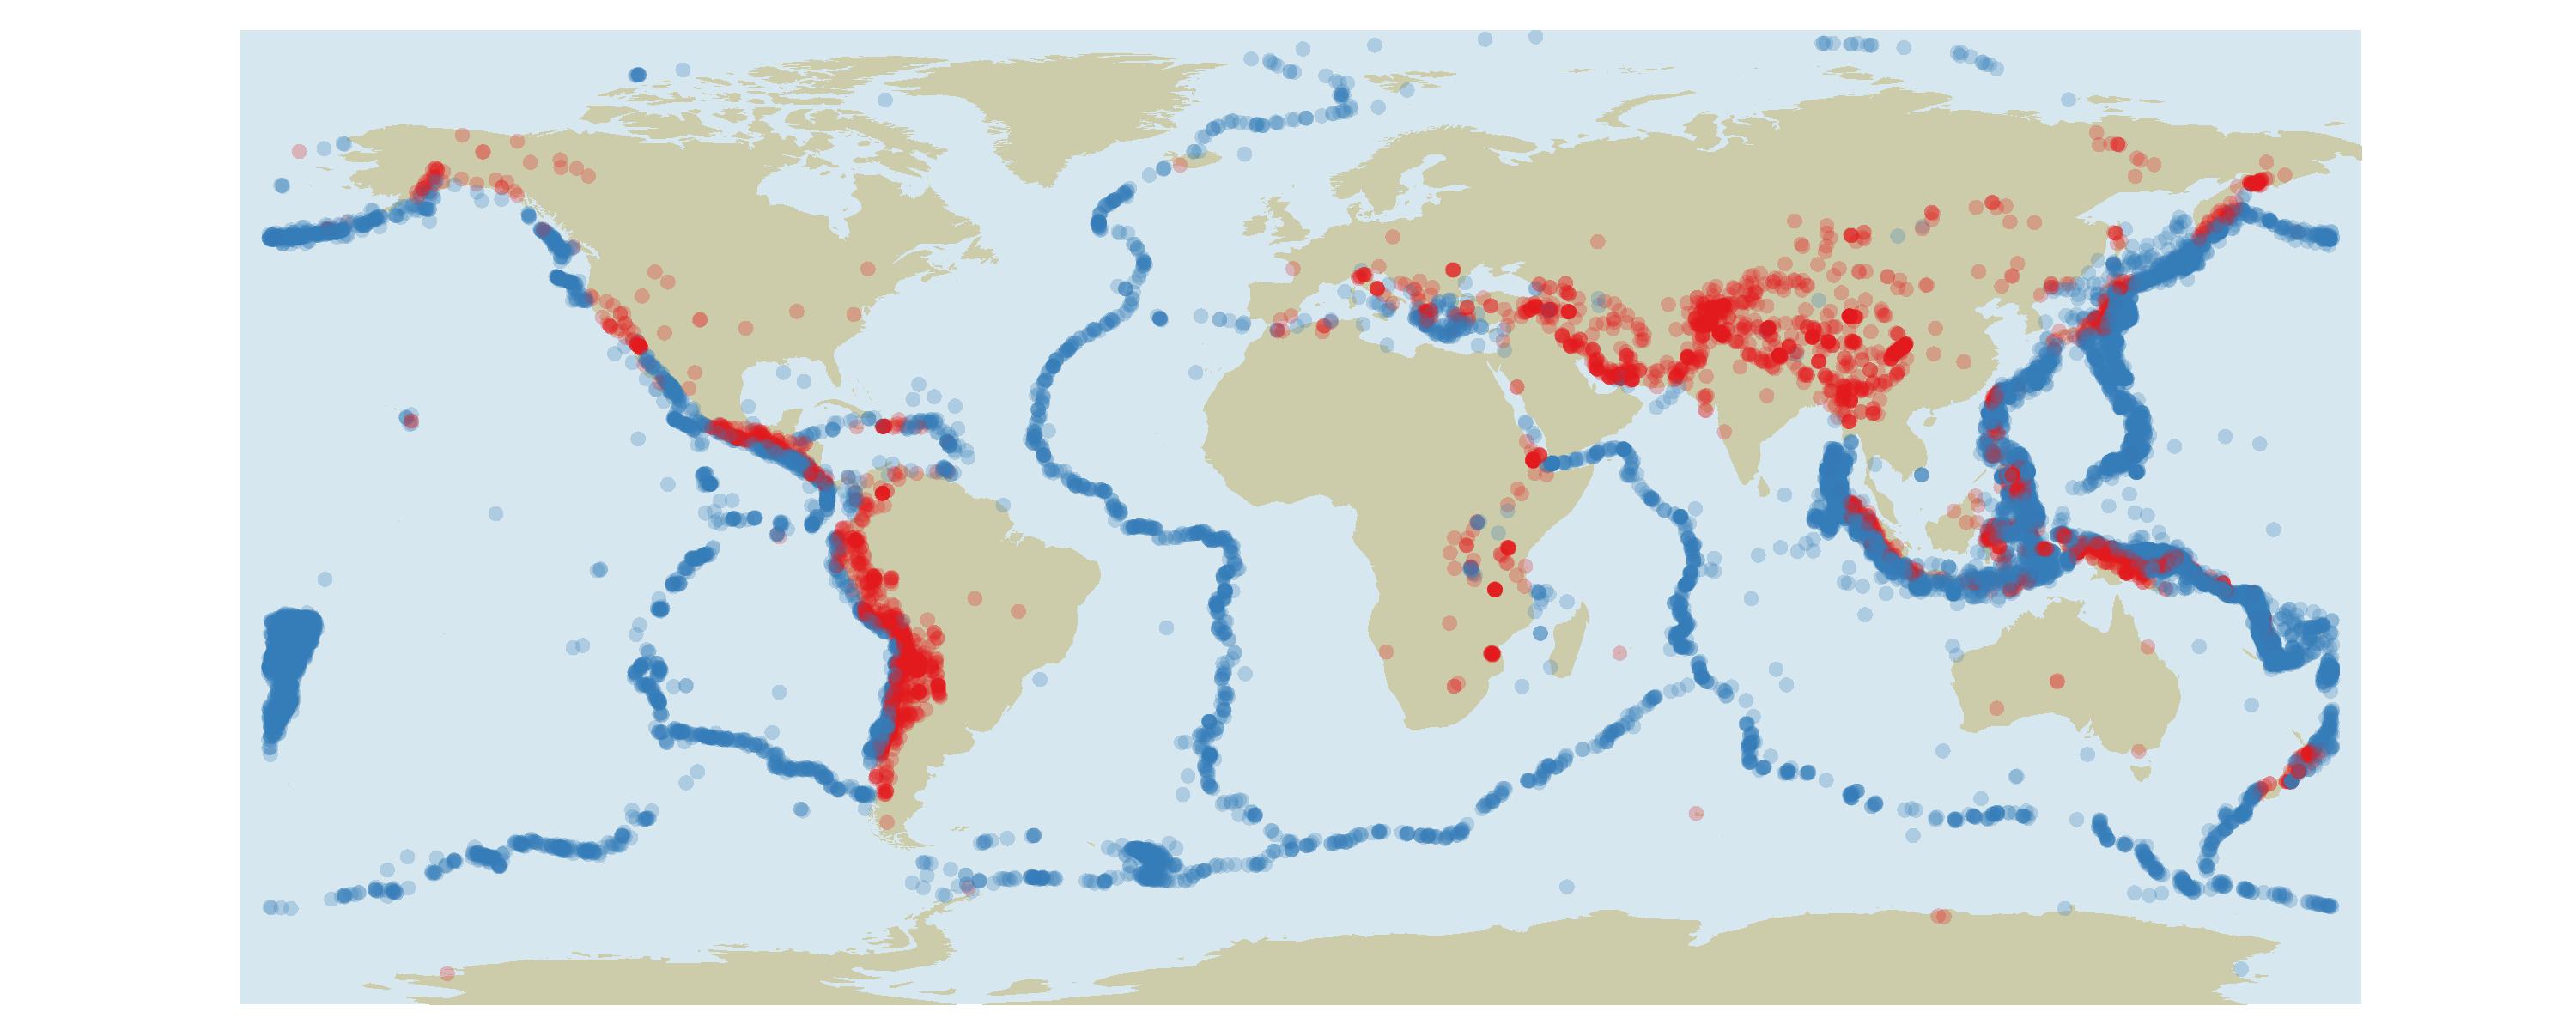 Map showing earthquake epicentre locations, coded according to whether the location is on land or under ocean.